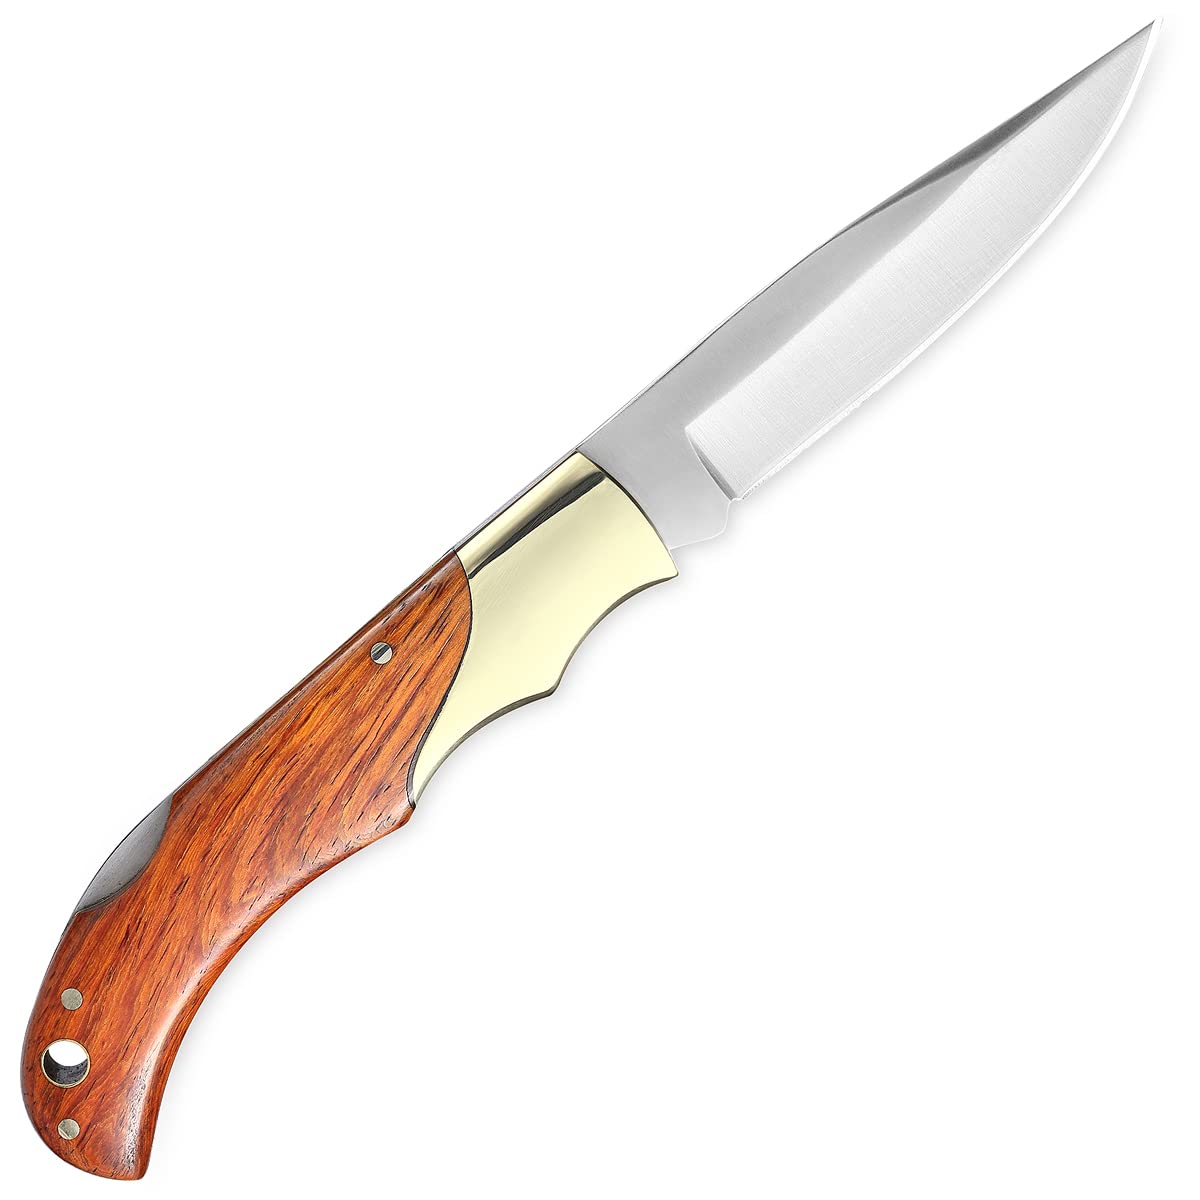 MIKI Classic Gentleman Edition pocket Knife Folding Knife for EDC, 440A Steel Super Blade, Brass Bolsters, Handcrafted Cocobolo Wood, Outdoor camping hiking fishing, Everyday Carry Knife for Men Women